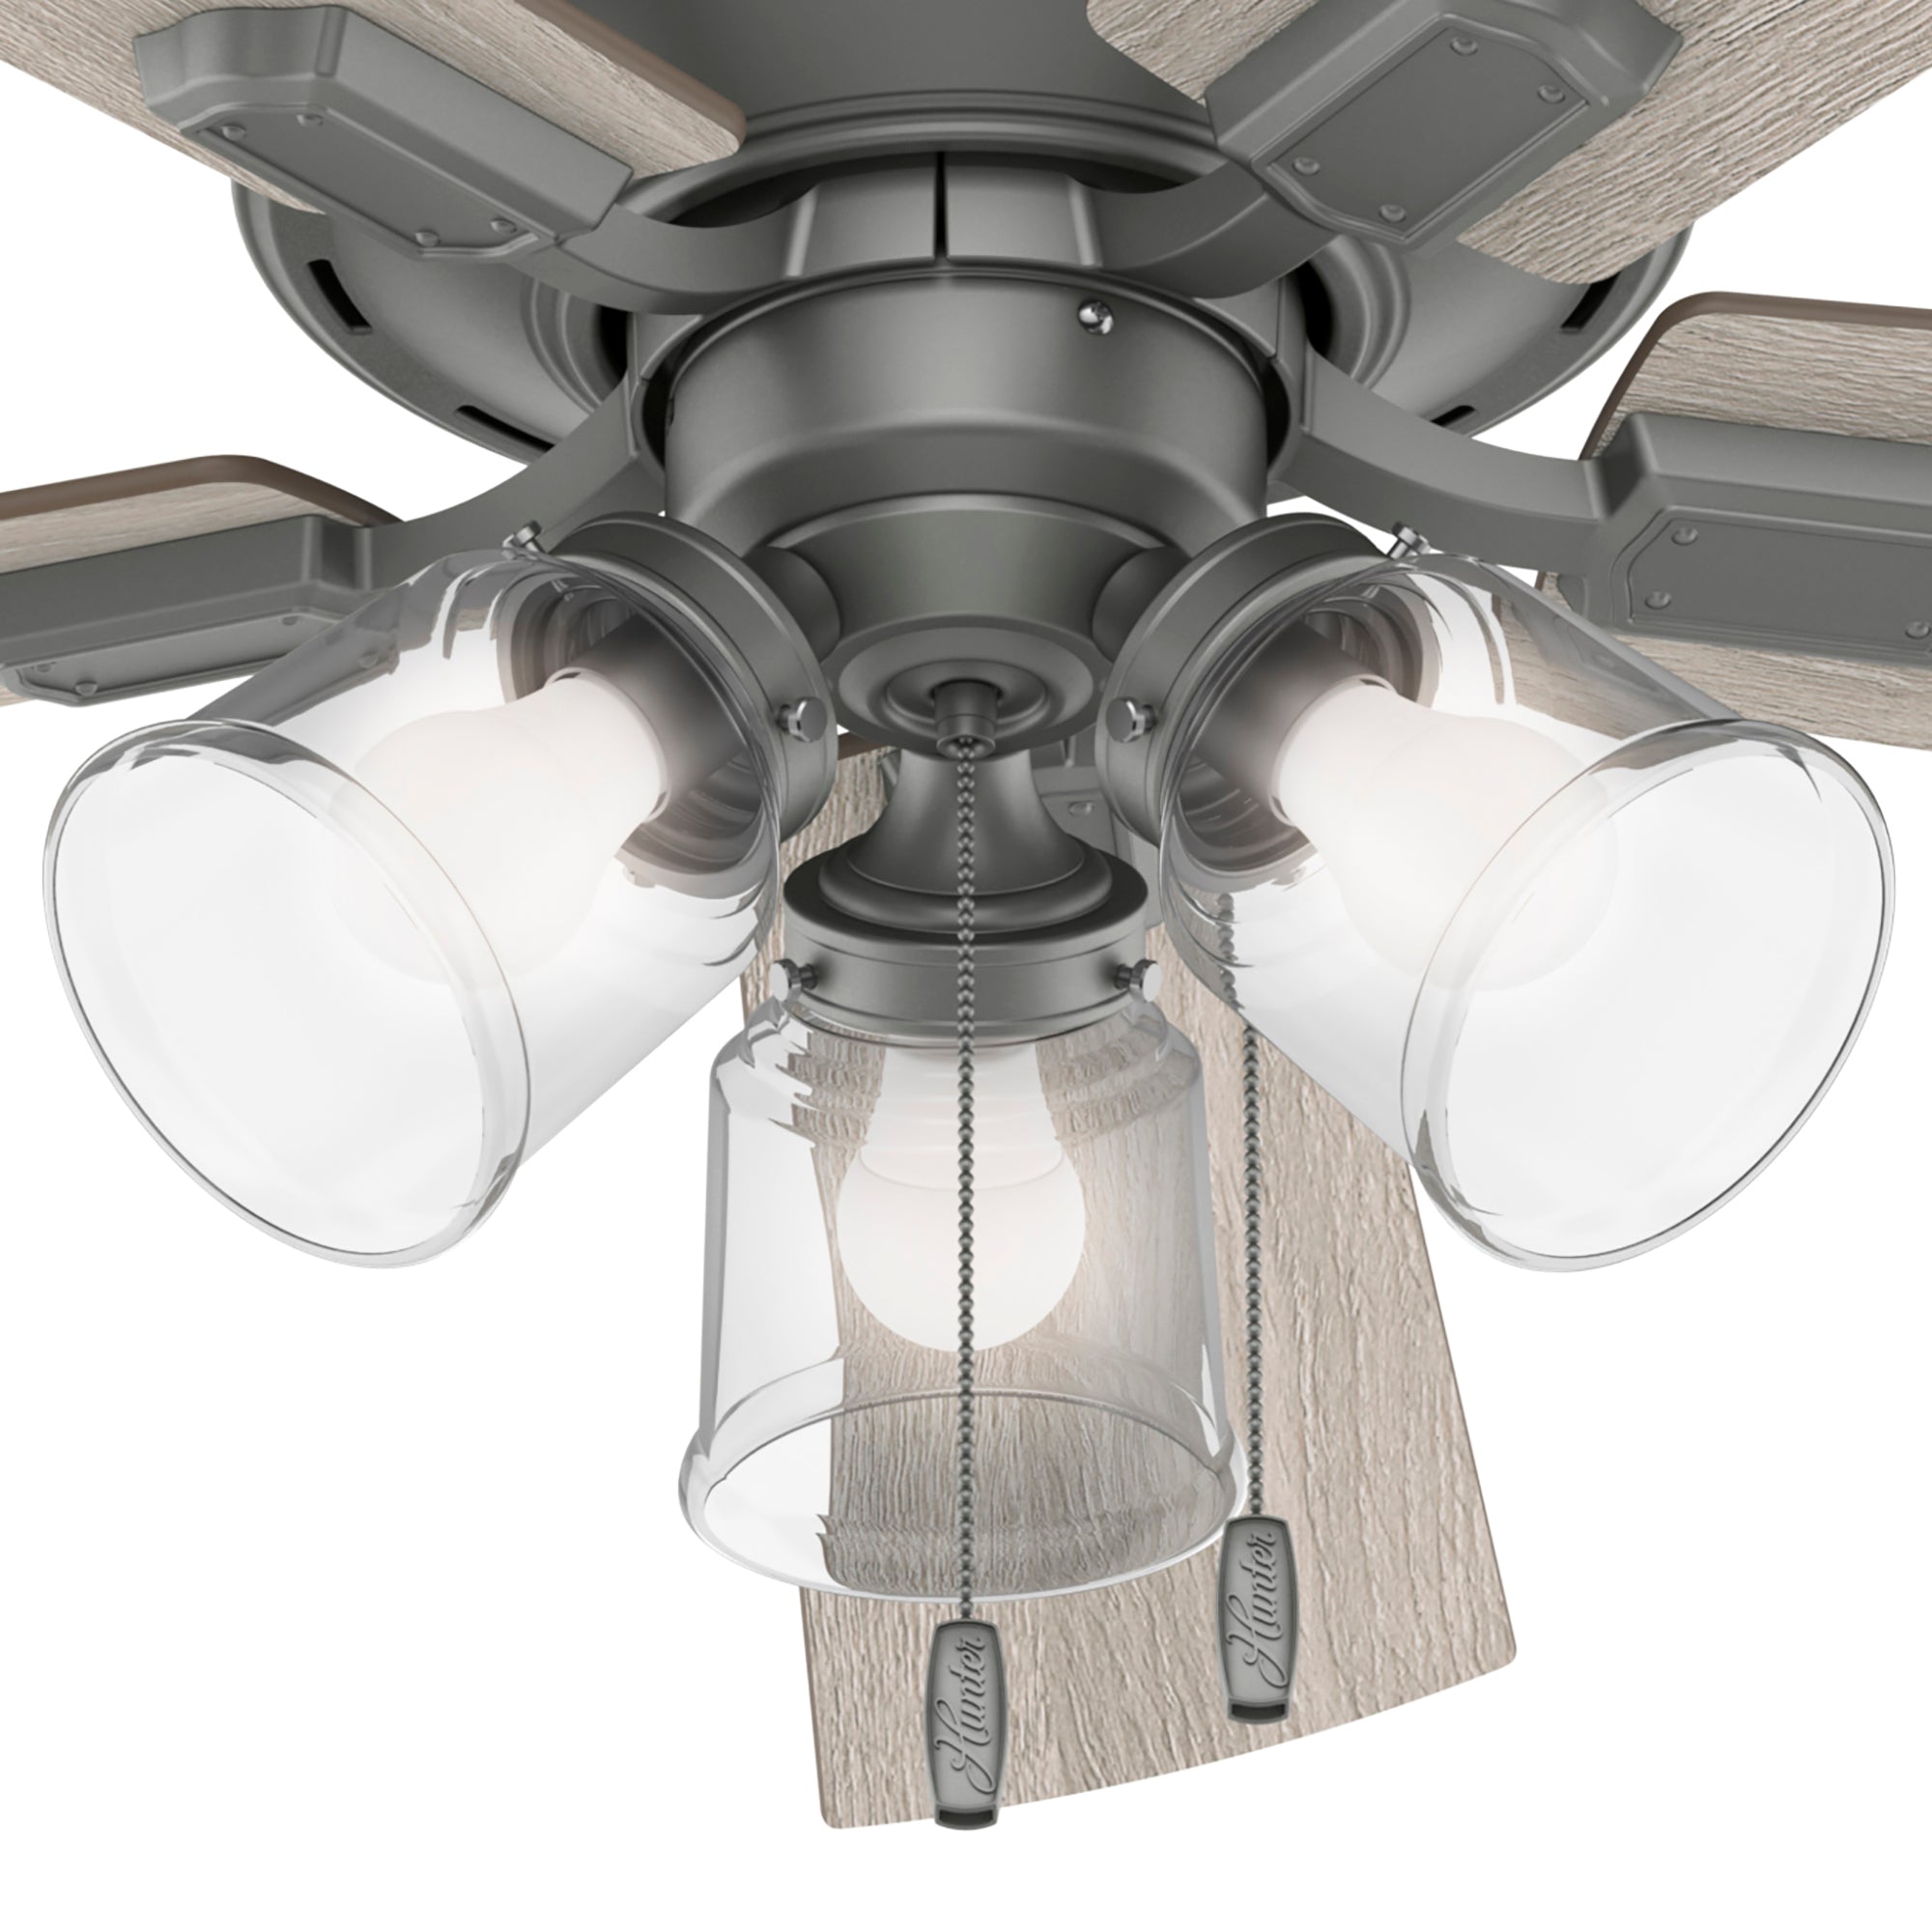 Hunter 52 inch Crestfield Ceiling Fan with LED Light Kit and Pull Chain Ceiling Fan Hunter   